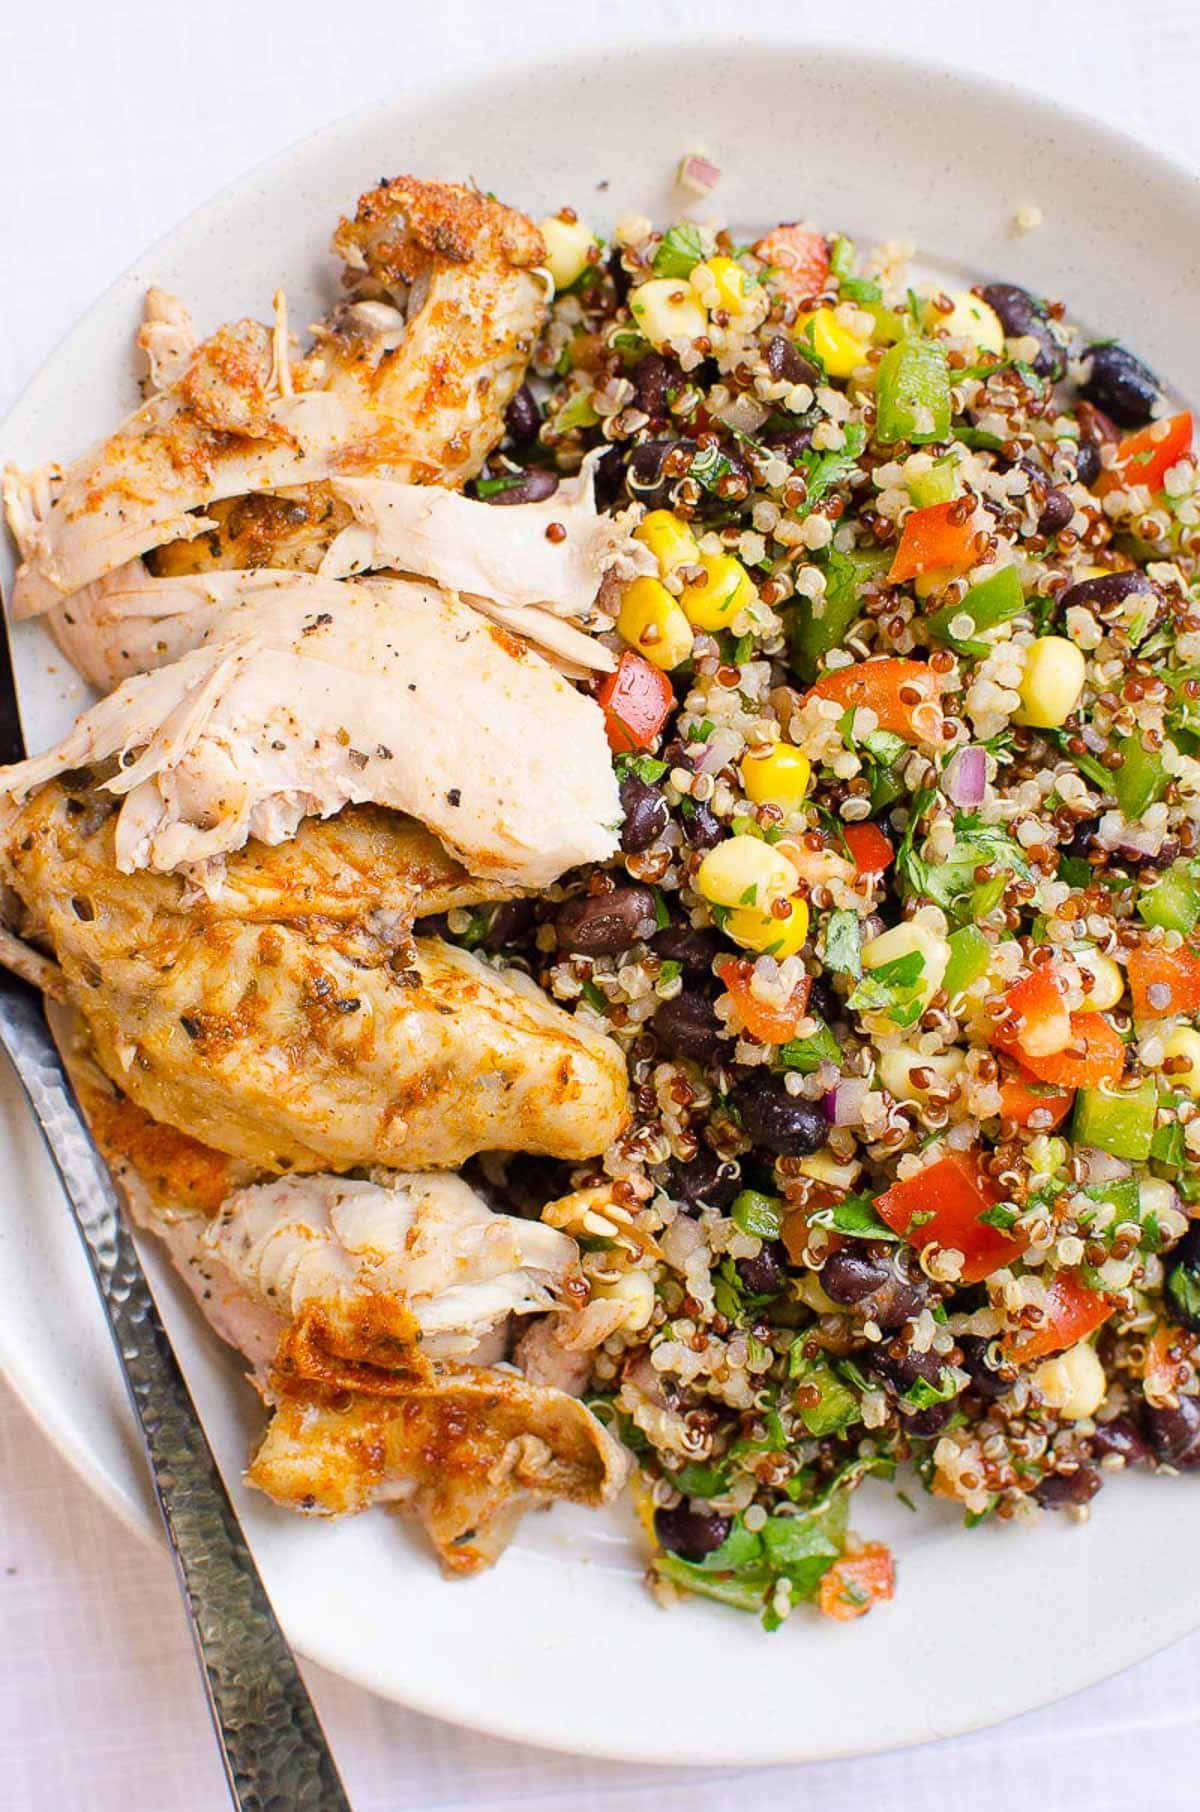 Cooked Instant Pot frozen chicken served with quinoa salad.